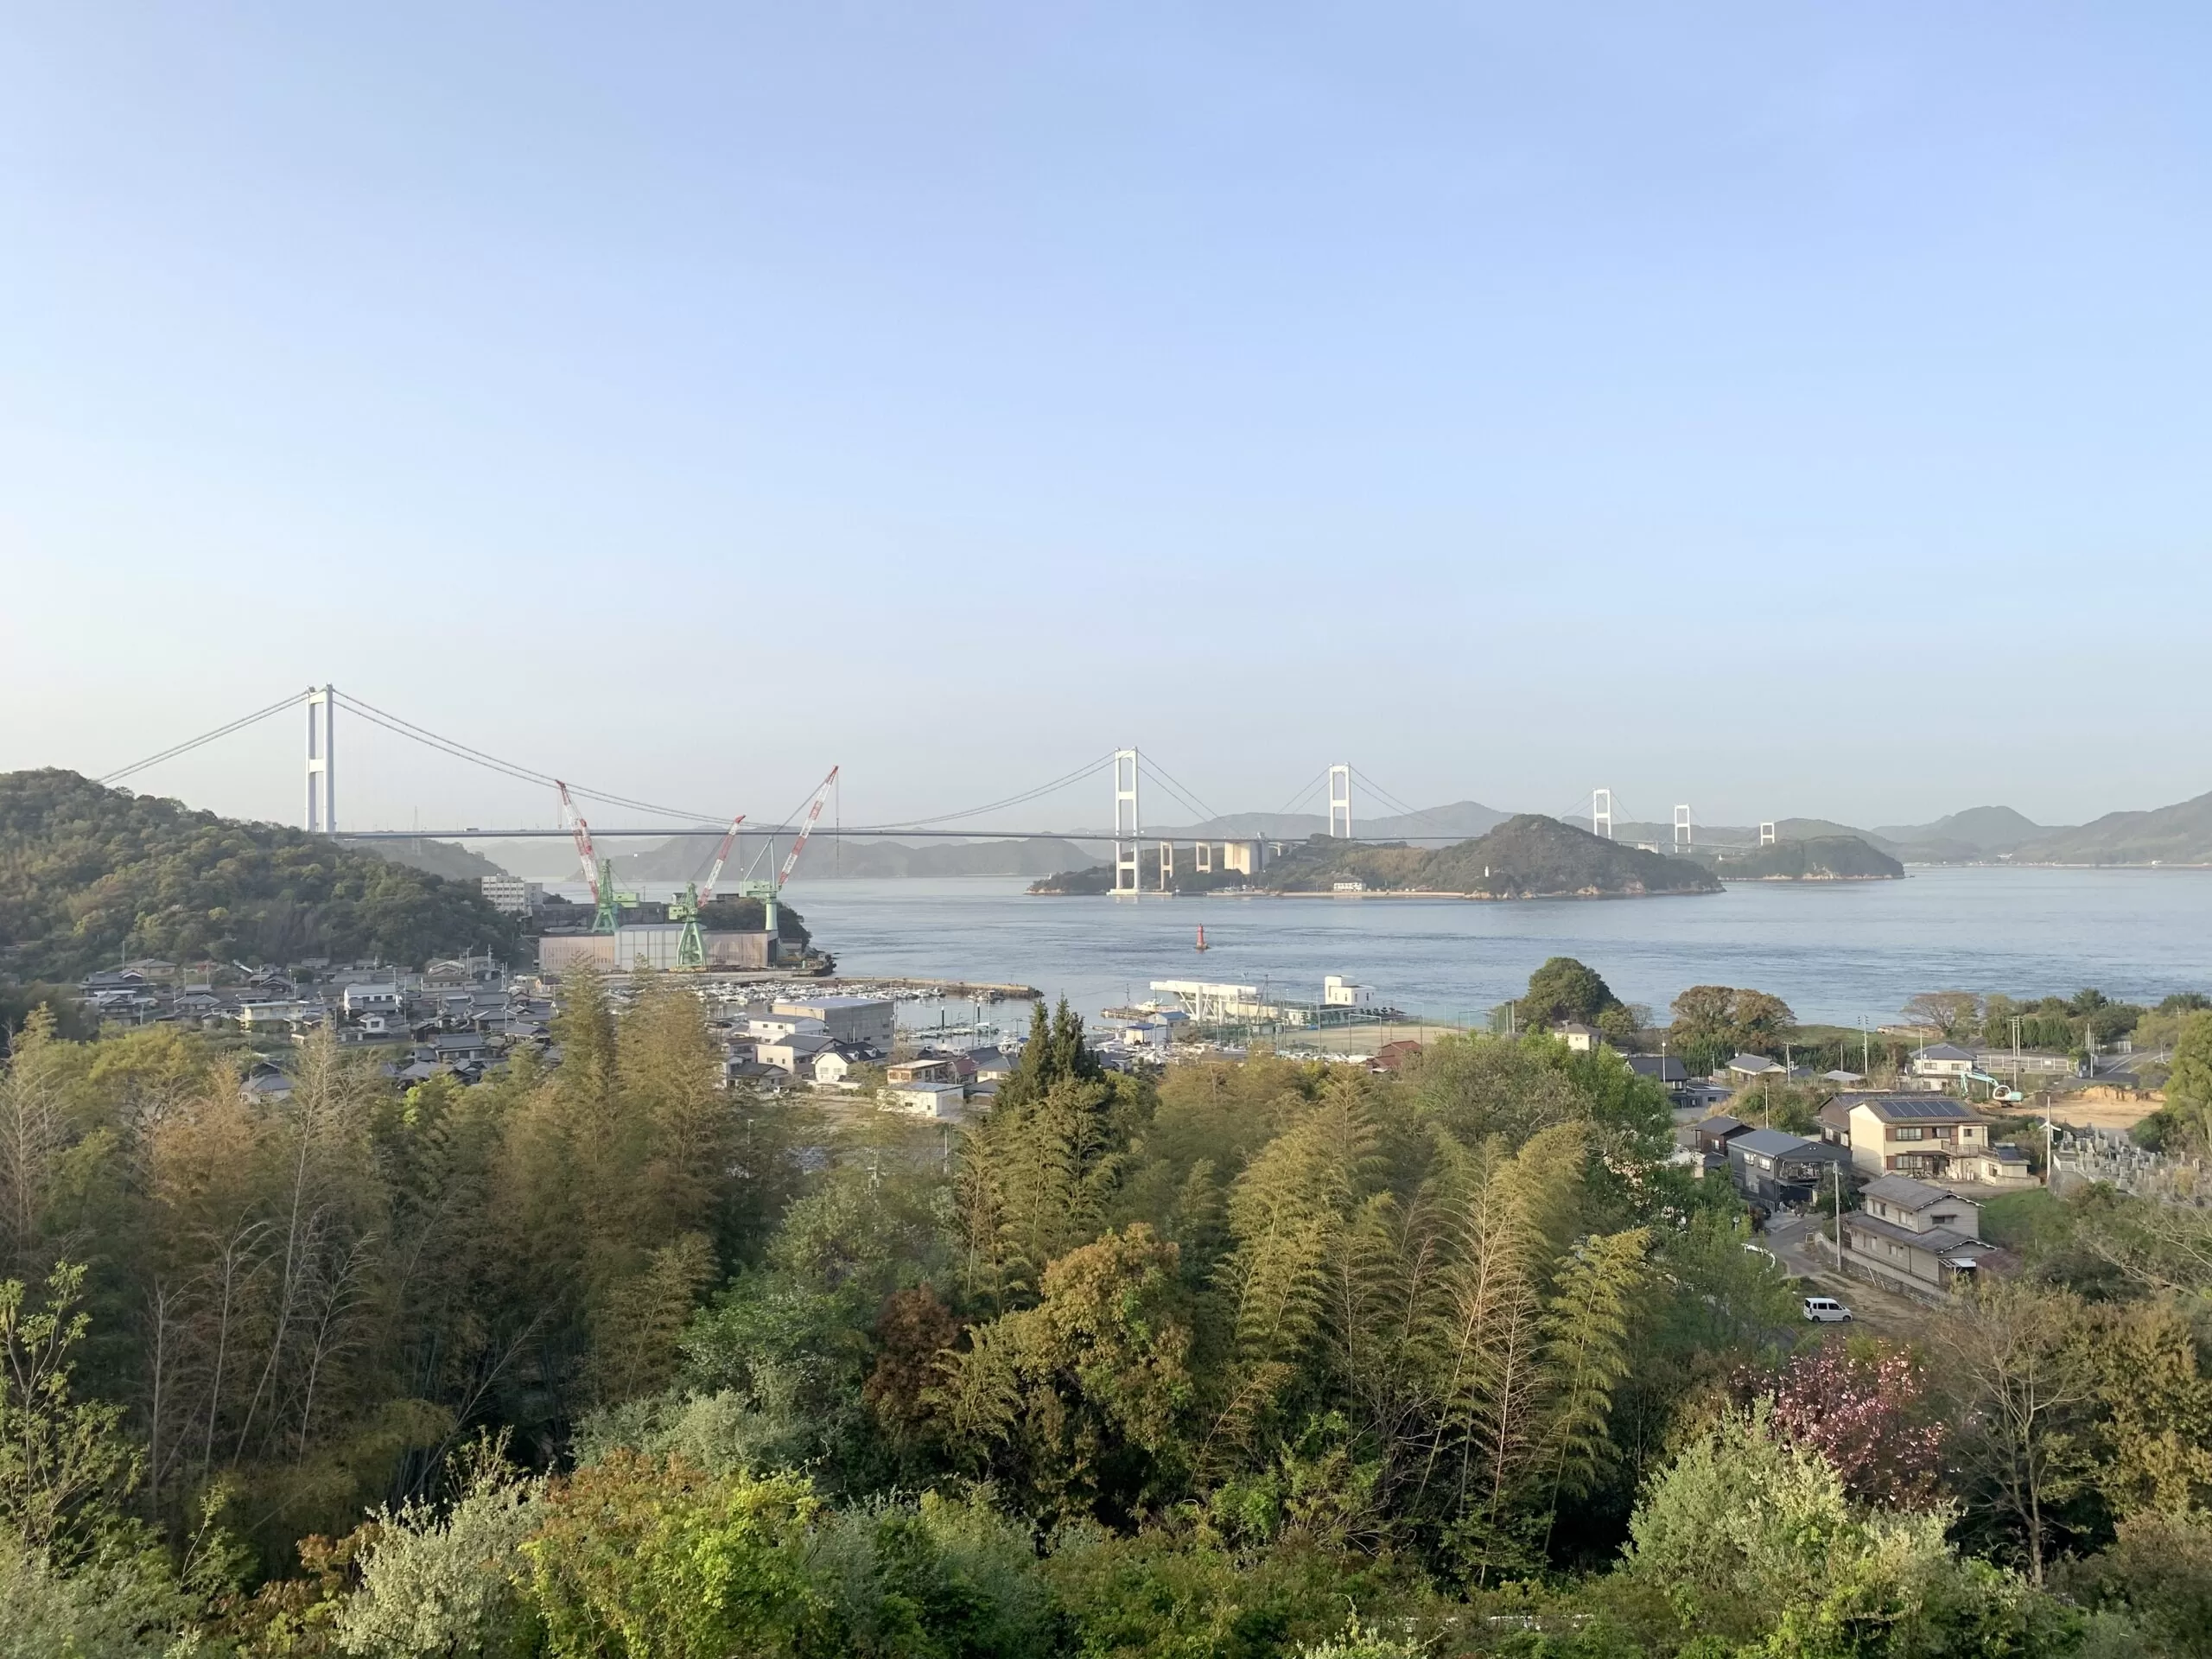 Photo of Seto Inland Sea taken from Imabari, with bridge connecting it to the neighbouring island